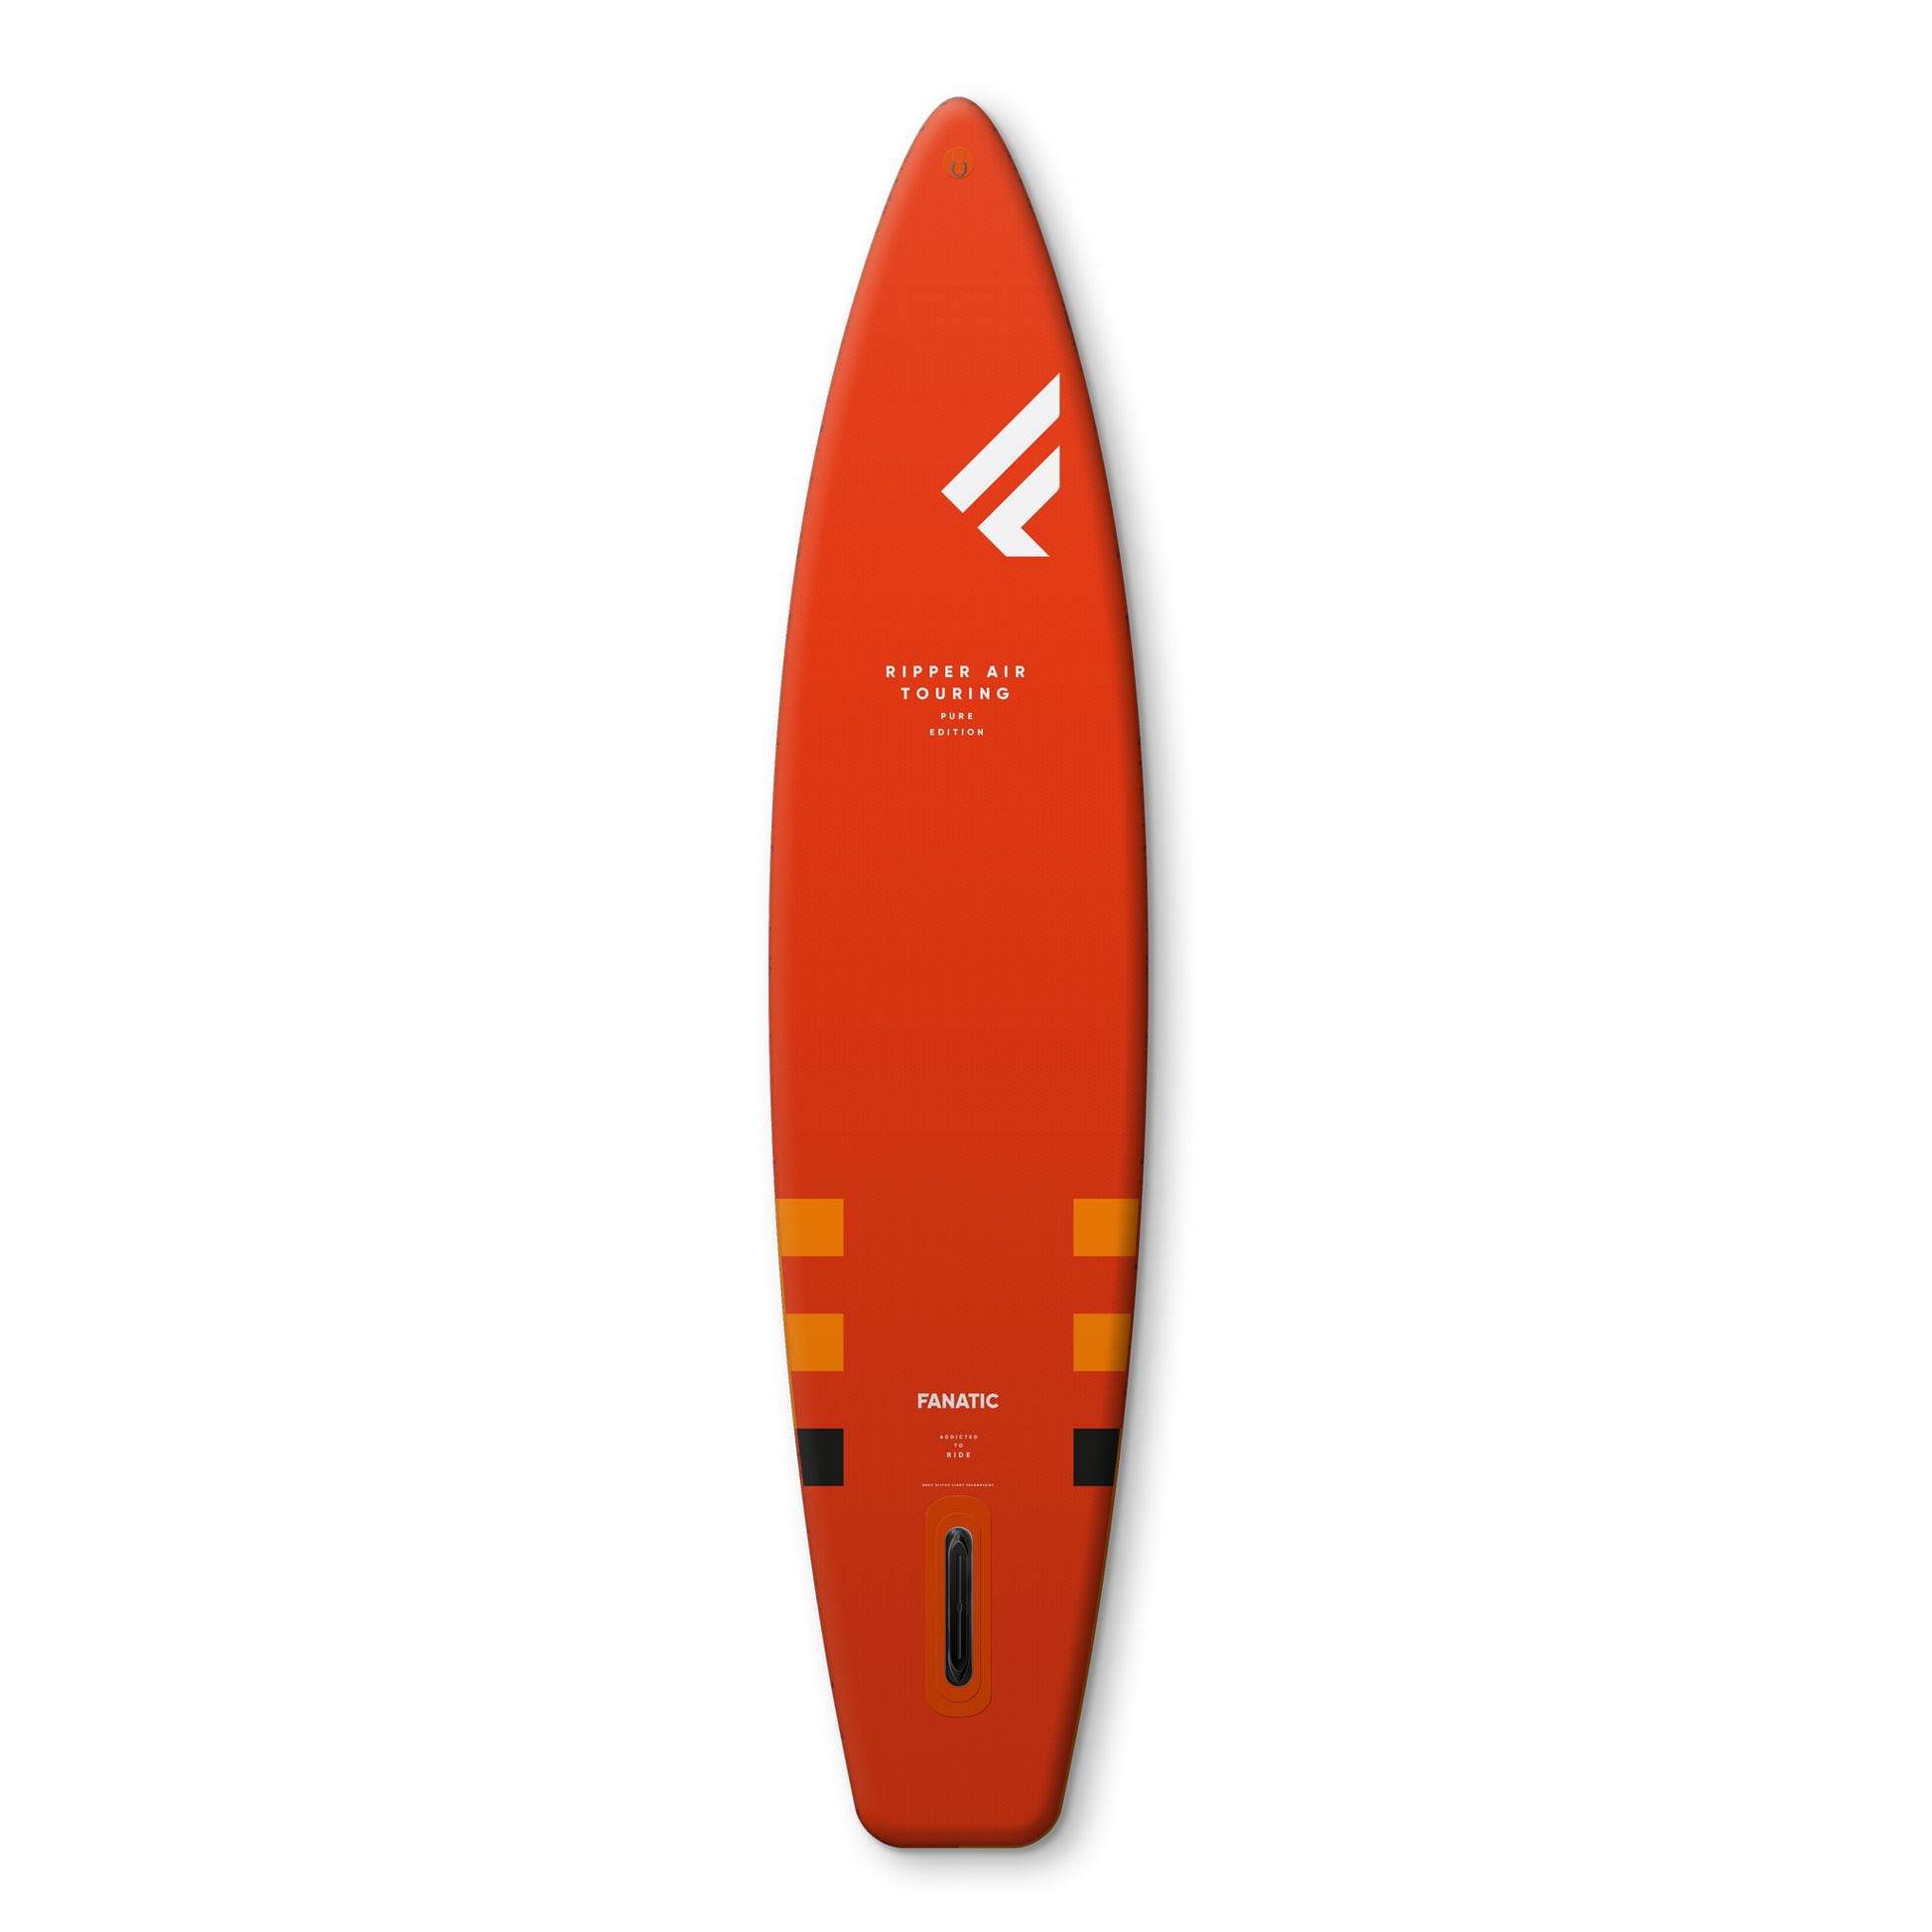 Fanatic iSUP Ripper Air Touring – SUP Inflatable Board